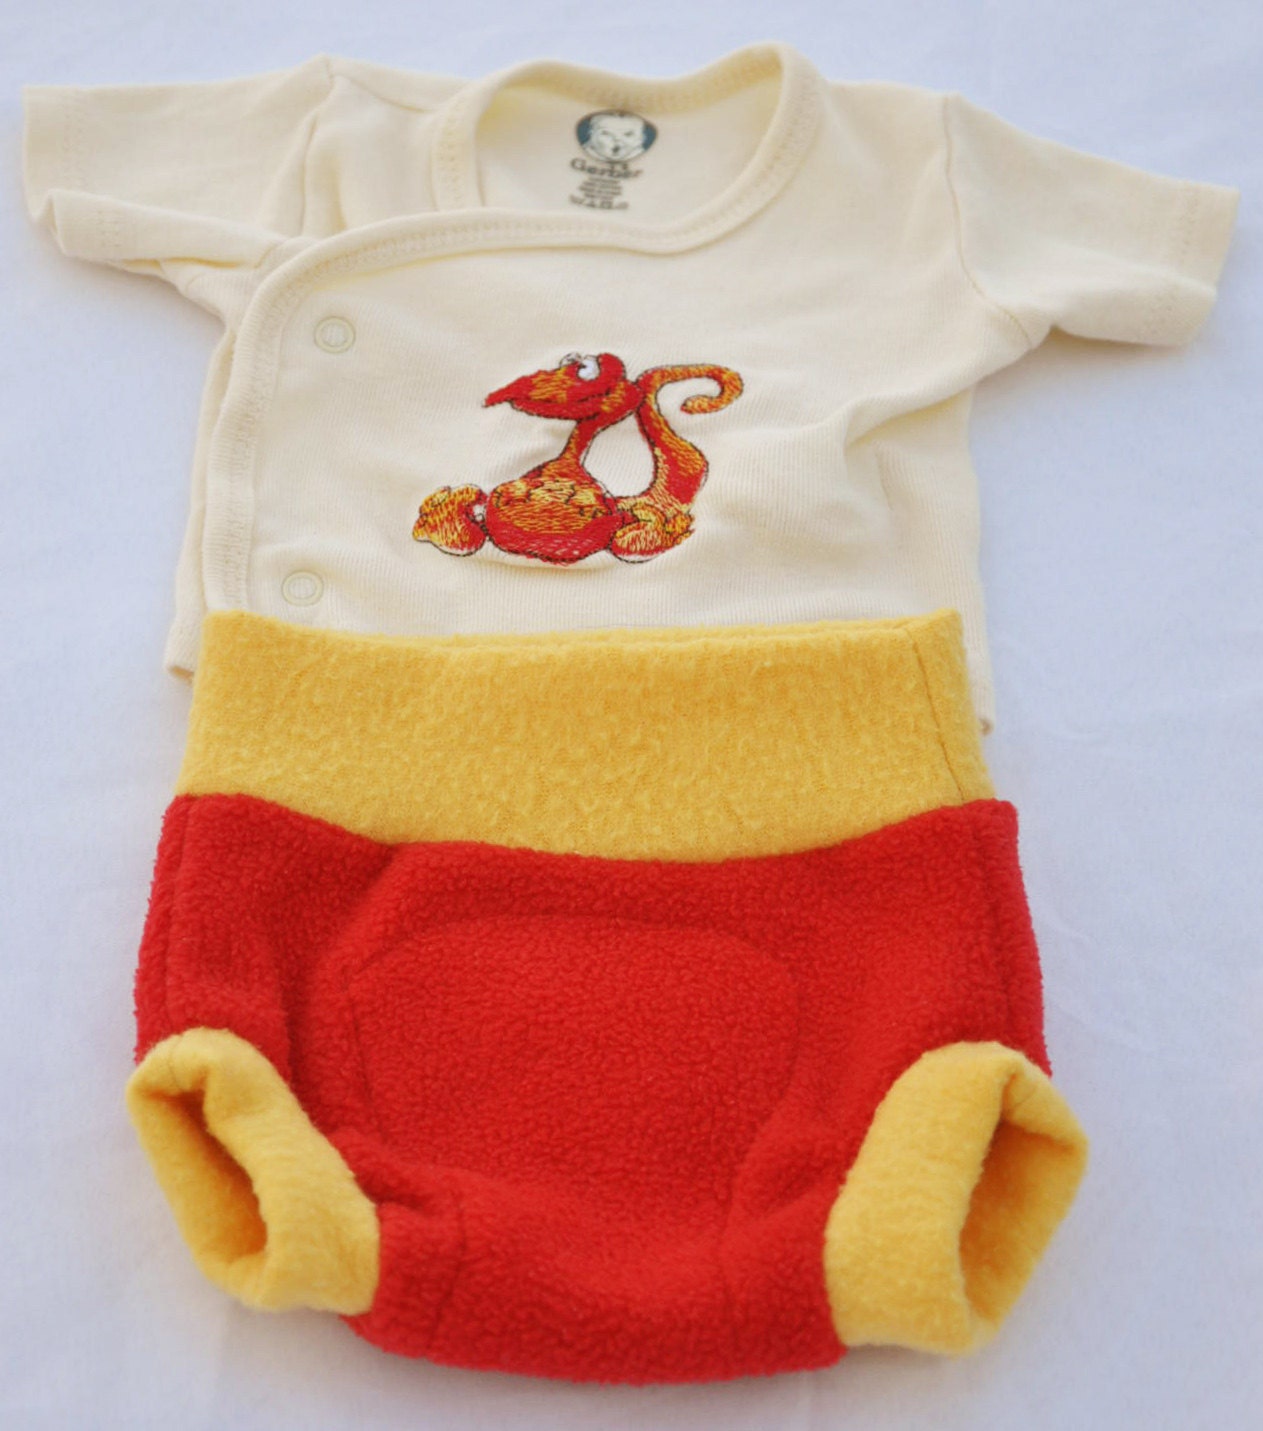 Fleece Soaker Diaper Cover and Embroidered T-shirt Set